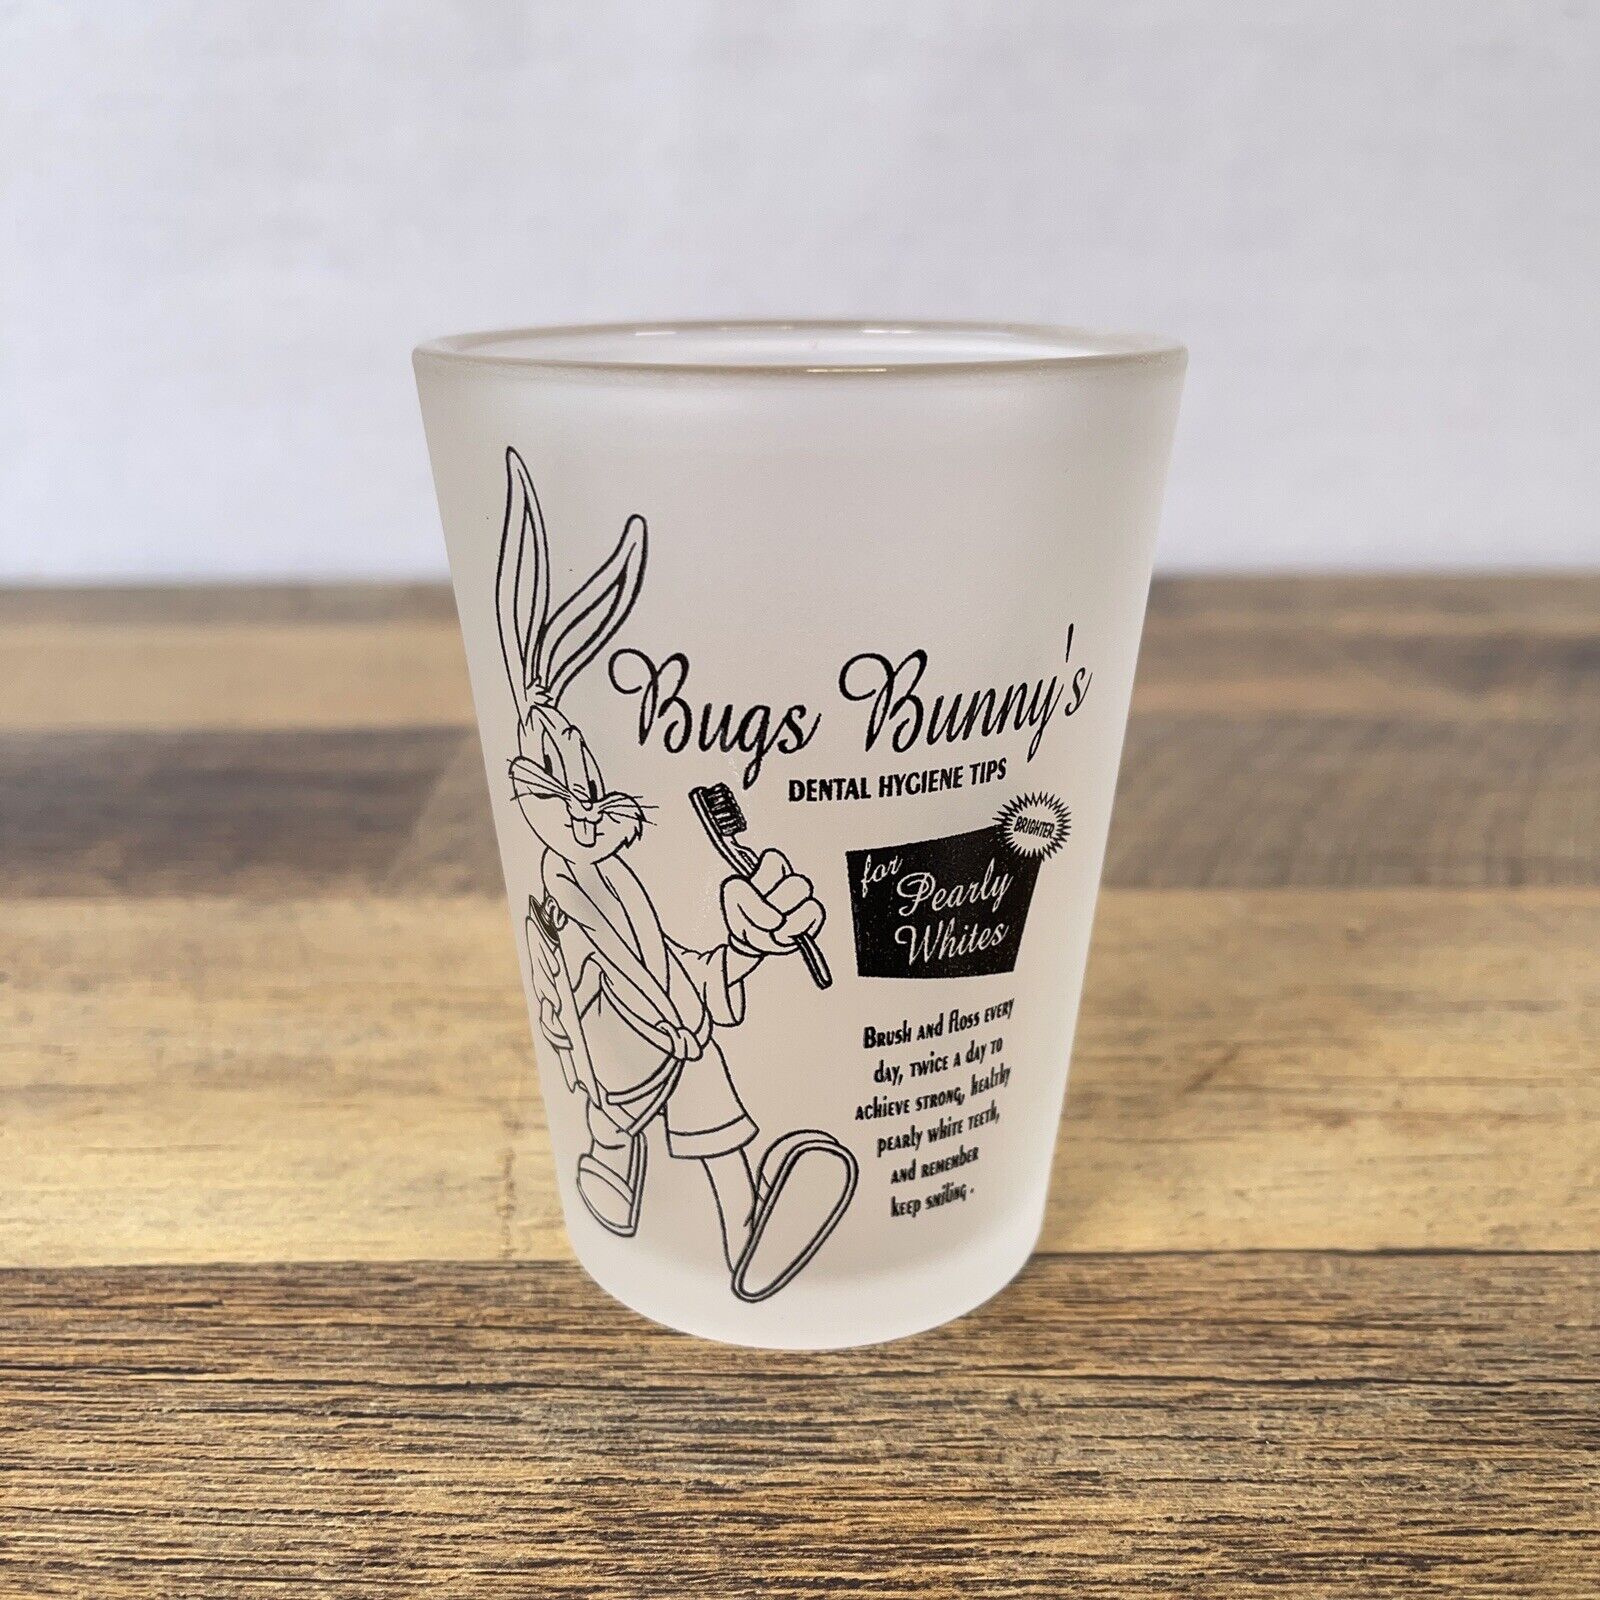 Vintage 1994 BUGS BUNNY'S Dental Hygiene Tips Glass Cup Pearly Whites Dentist